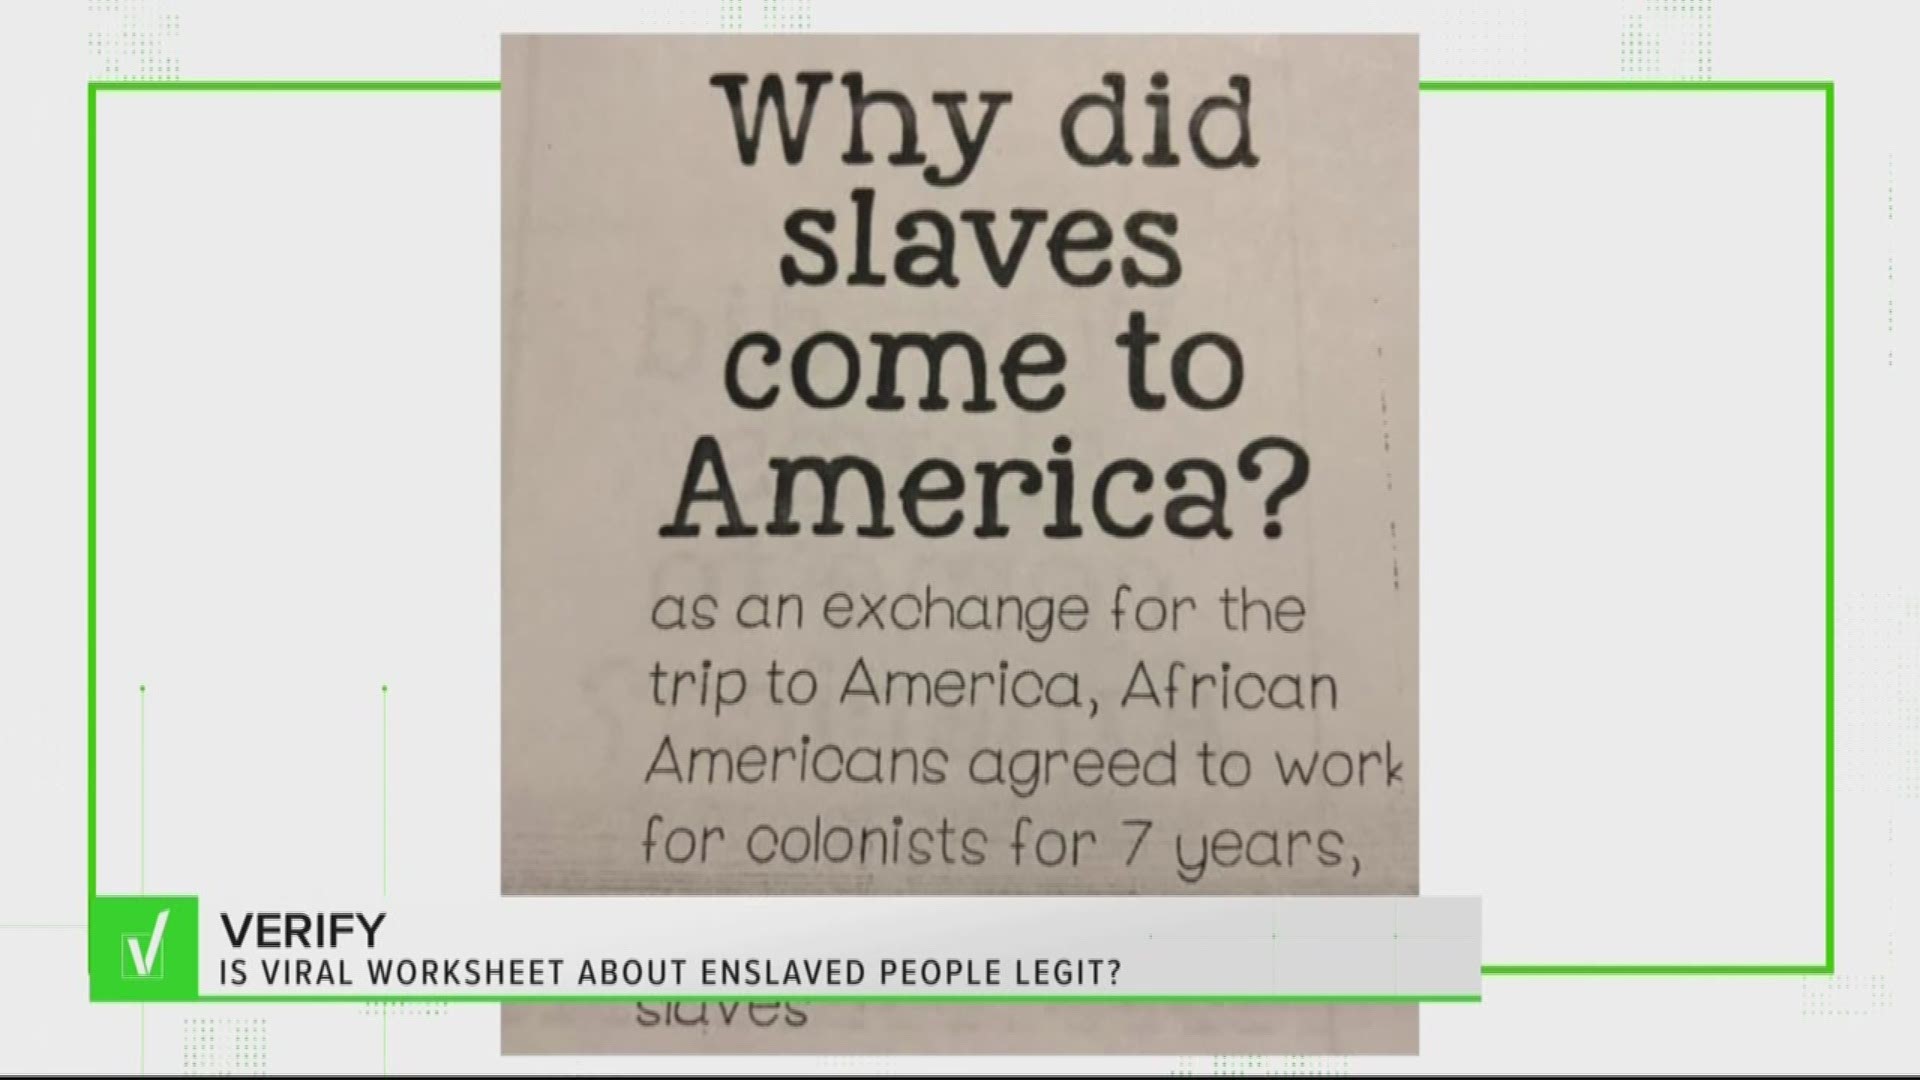 There's a question on it that claims enslaved people came to America after agreeing to work for colonists for seven years.